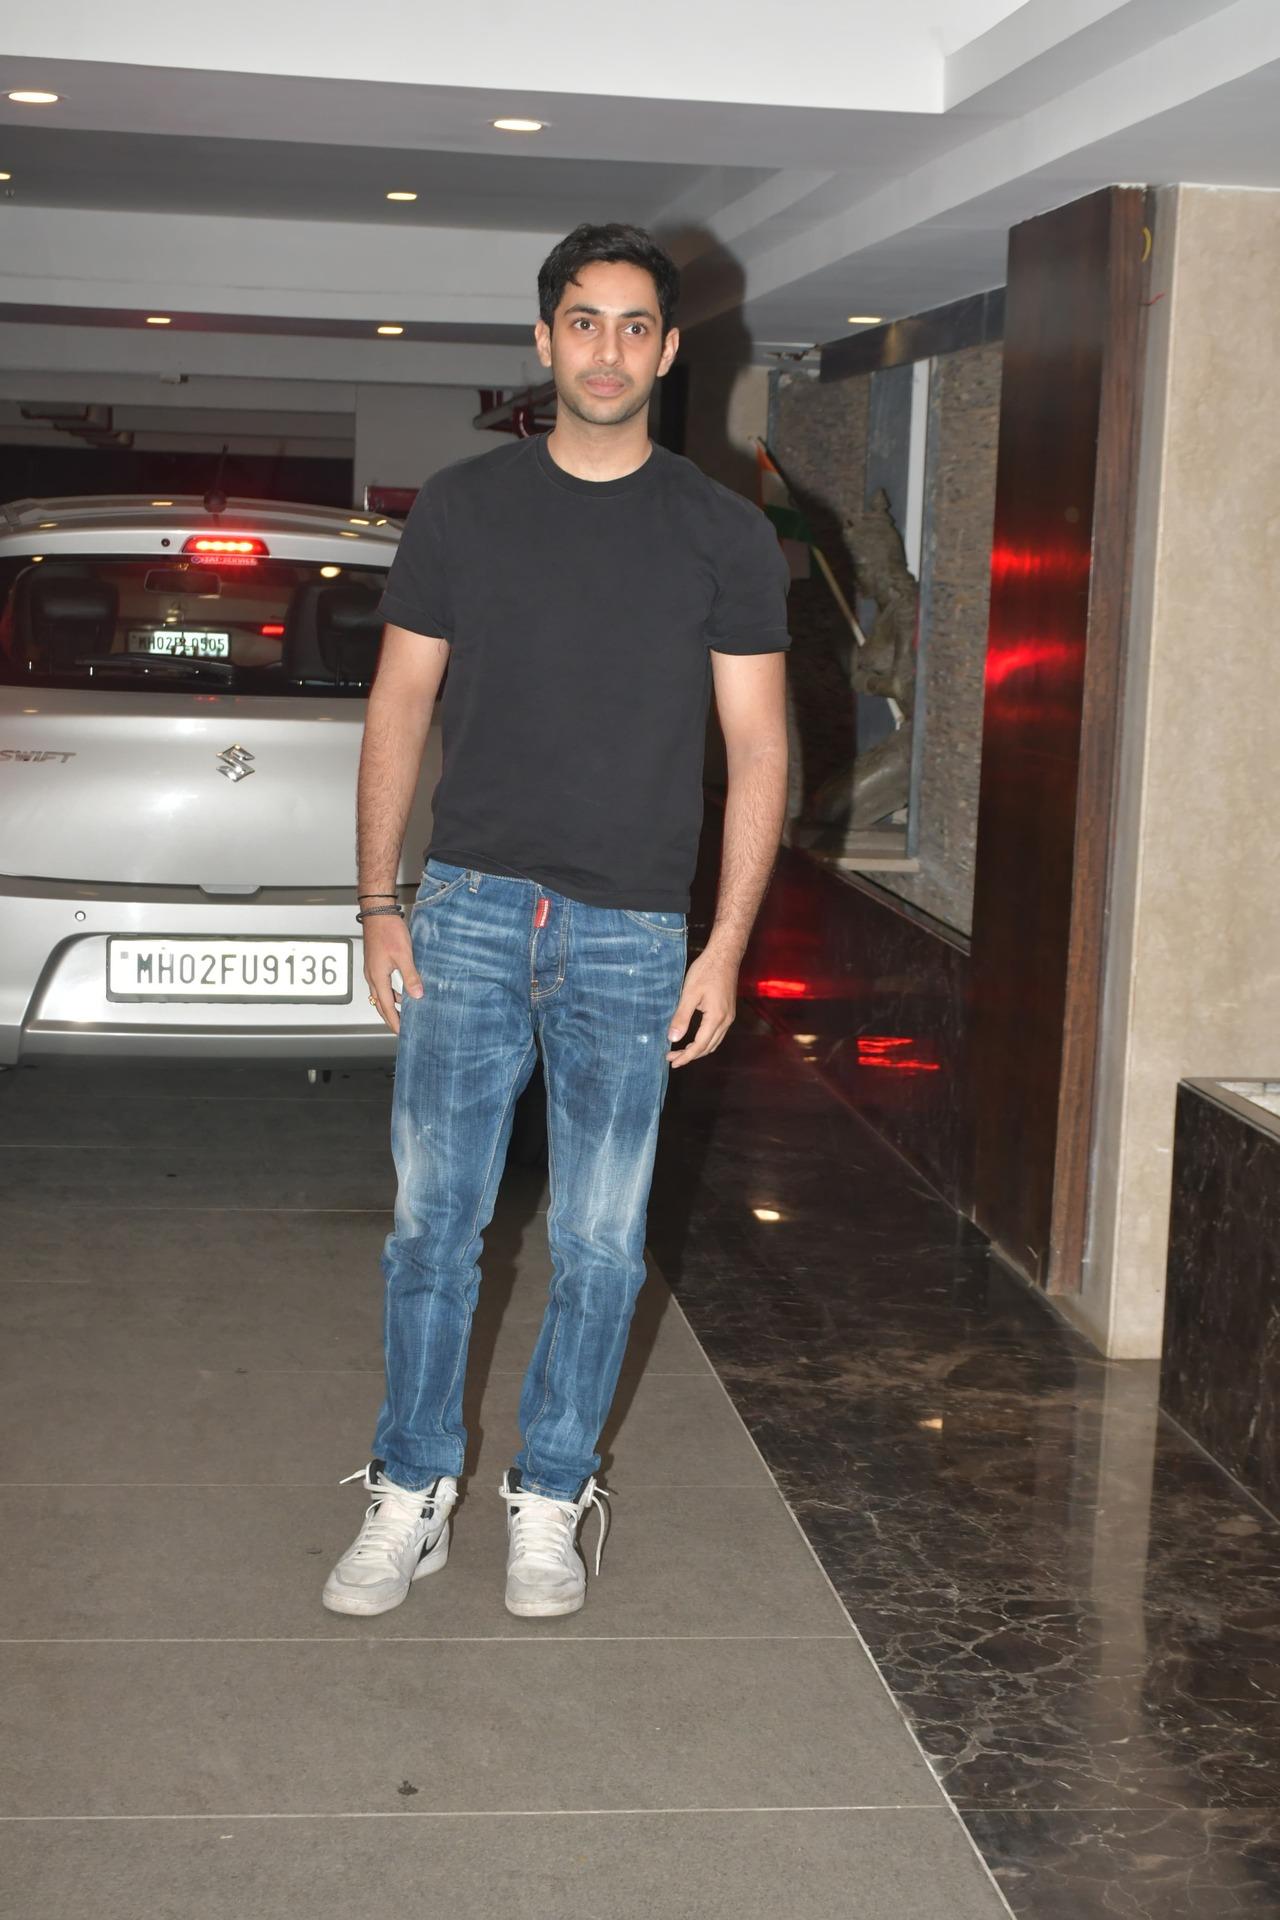 New actor in town-Agastya Nanda was also seen at the party dressed in casual wear